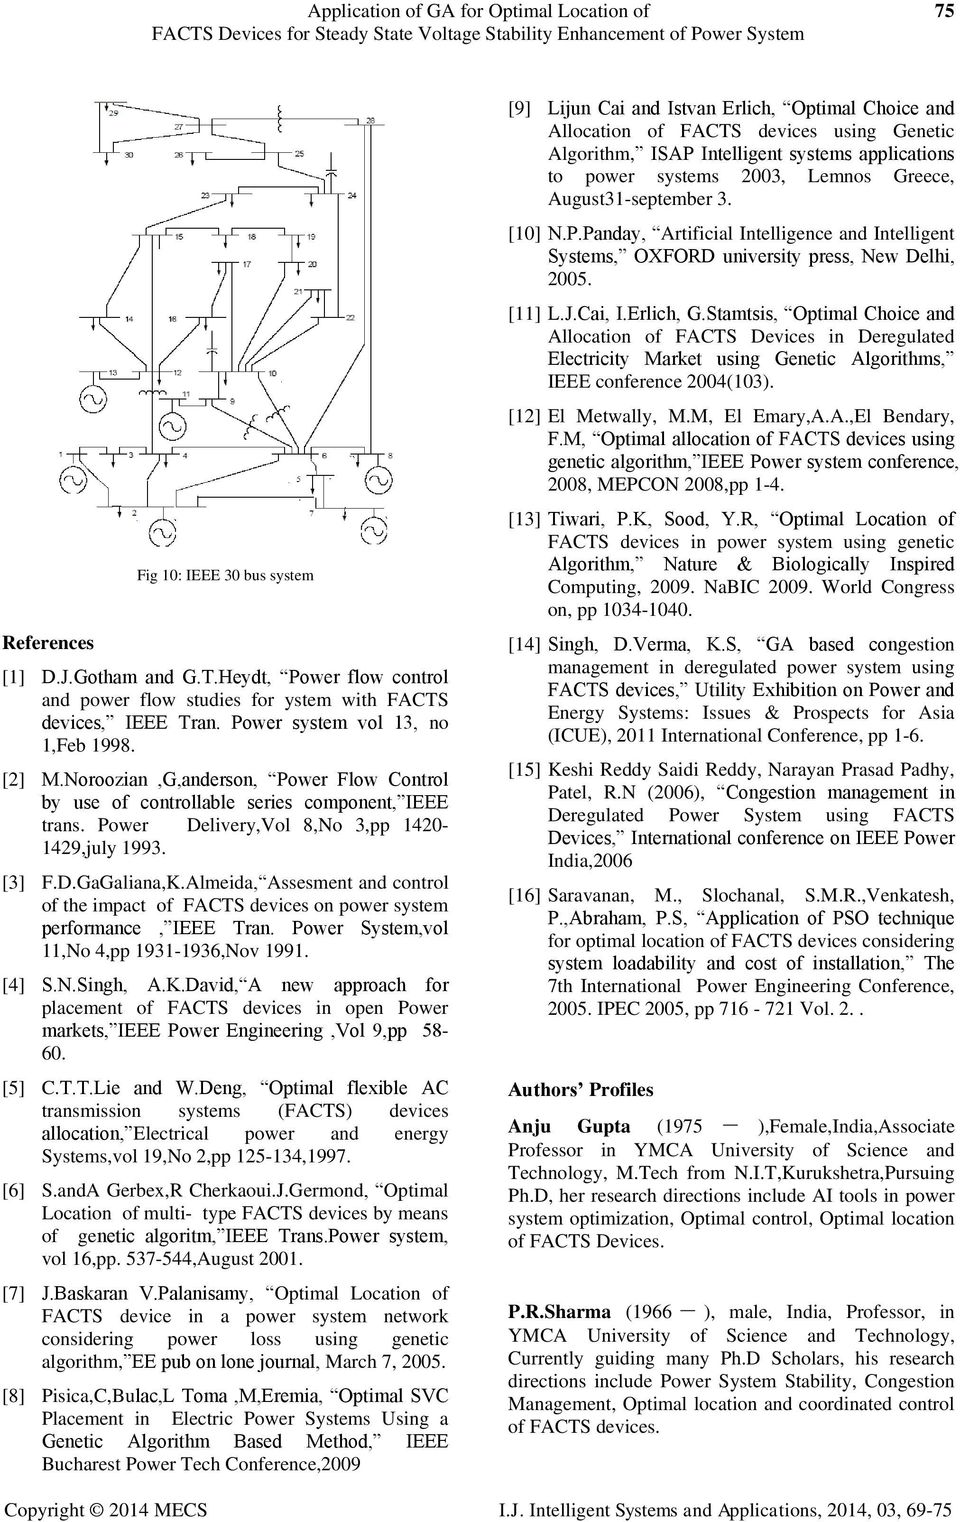 Noroozian,G,anderson, Power Flow Control by use of controllable series component, IEEE trans. Power Delivery,Vol 8,No 3,pp 1420-1429,july 1993. [3] F.D.GaGaliana,K.